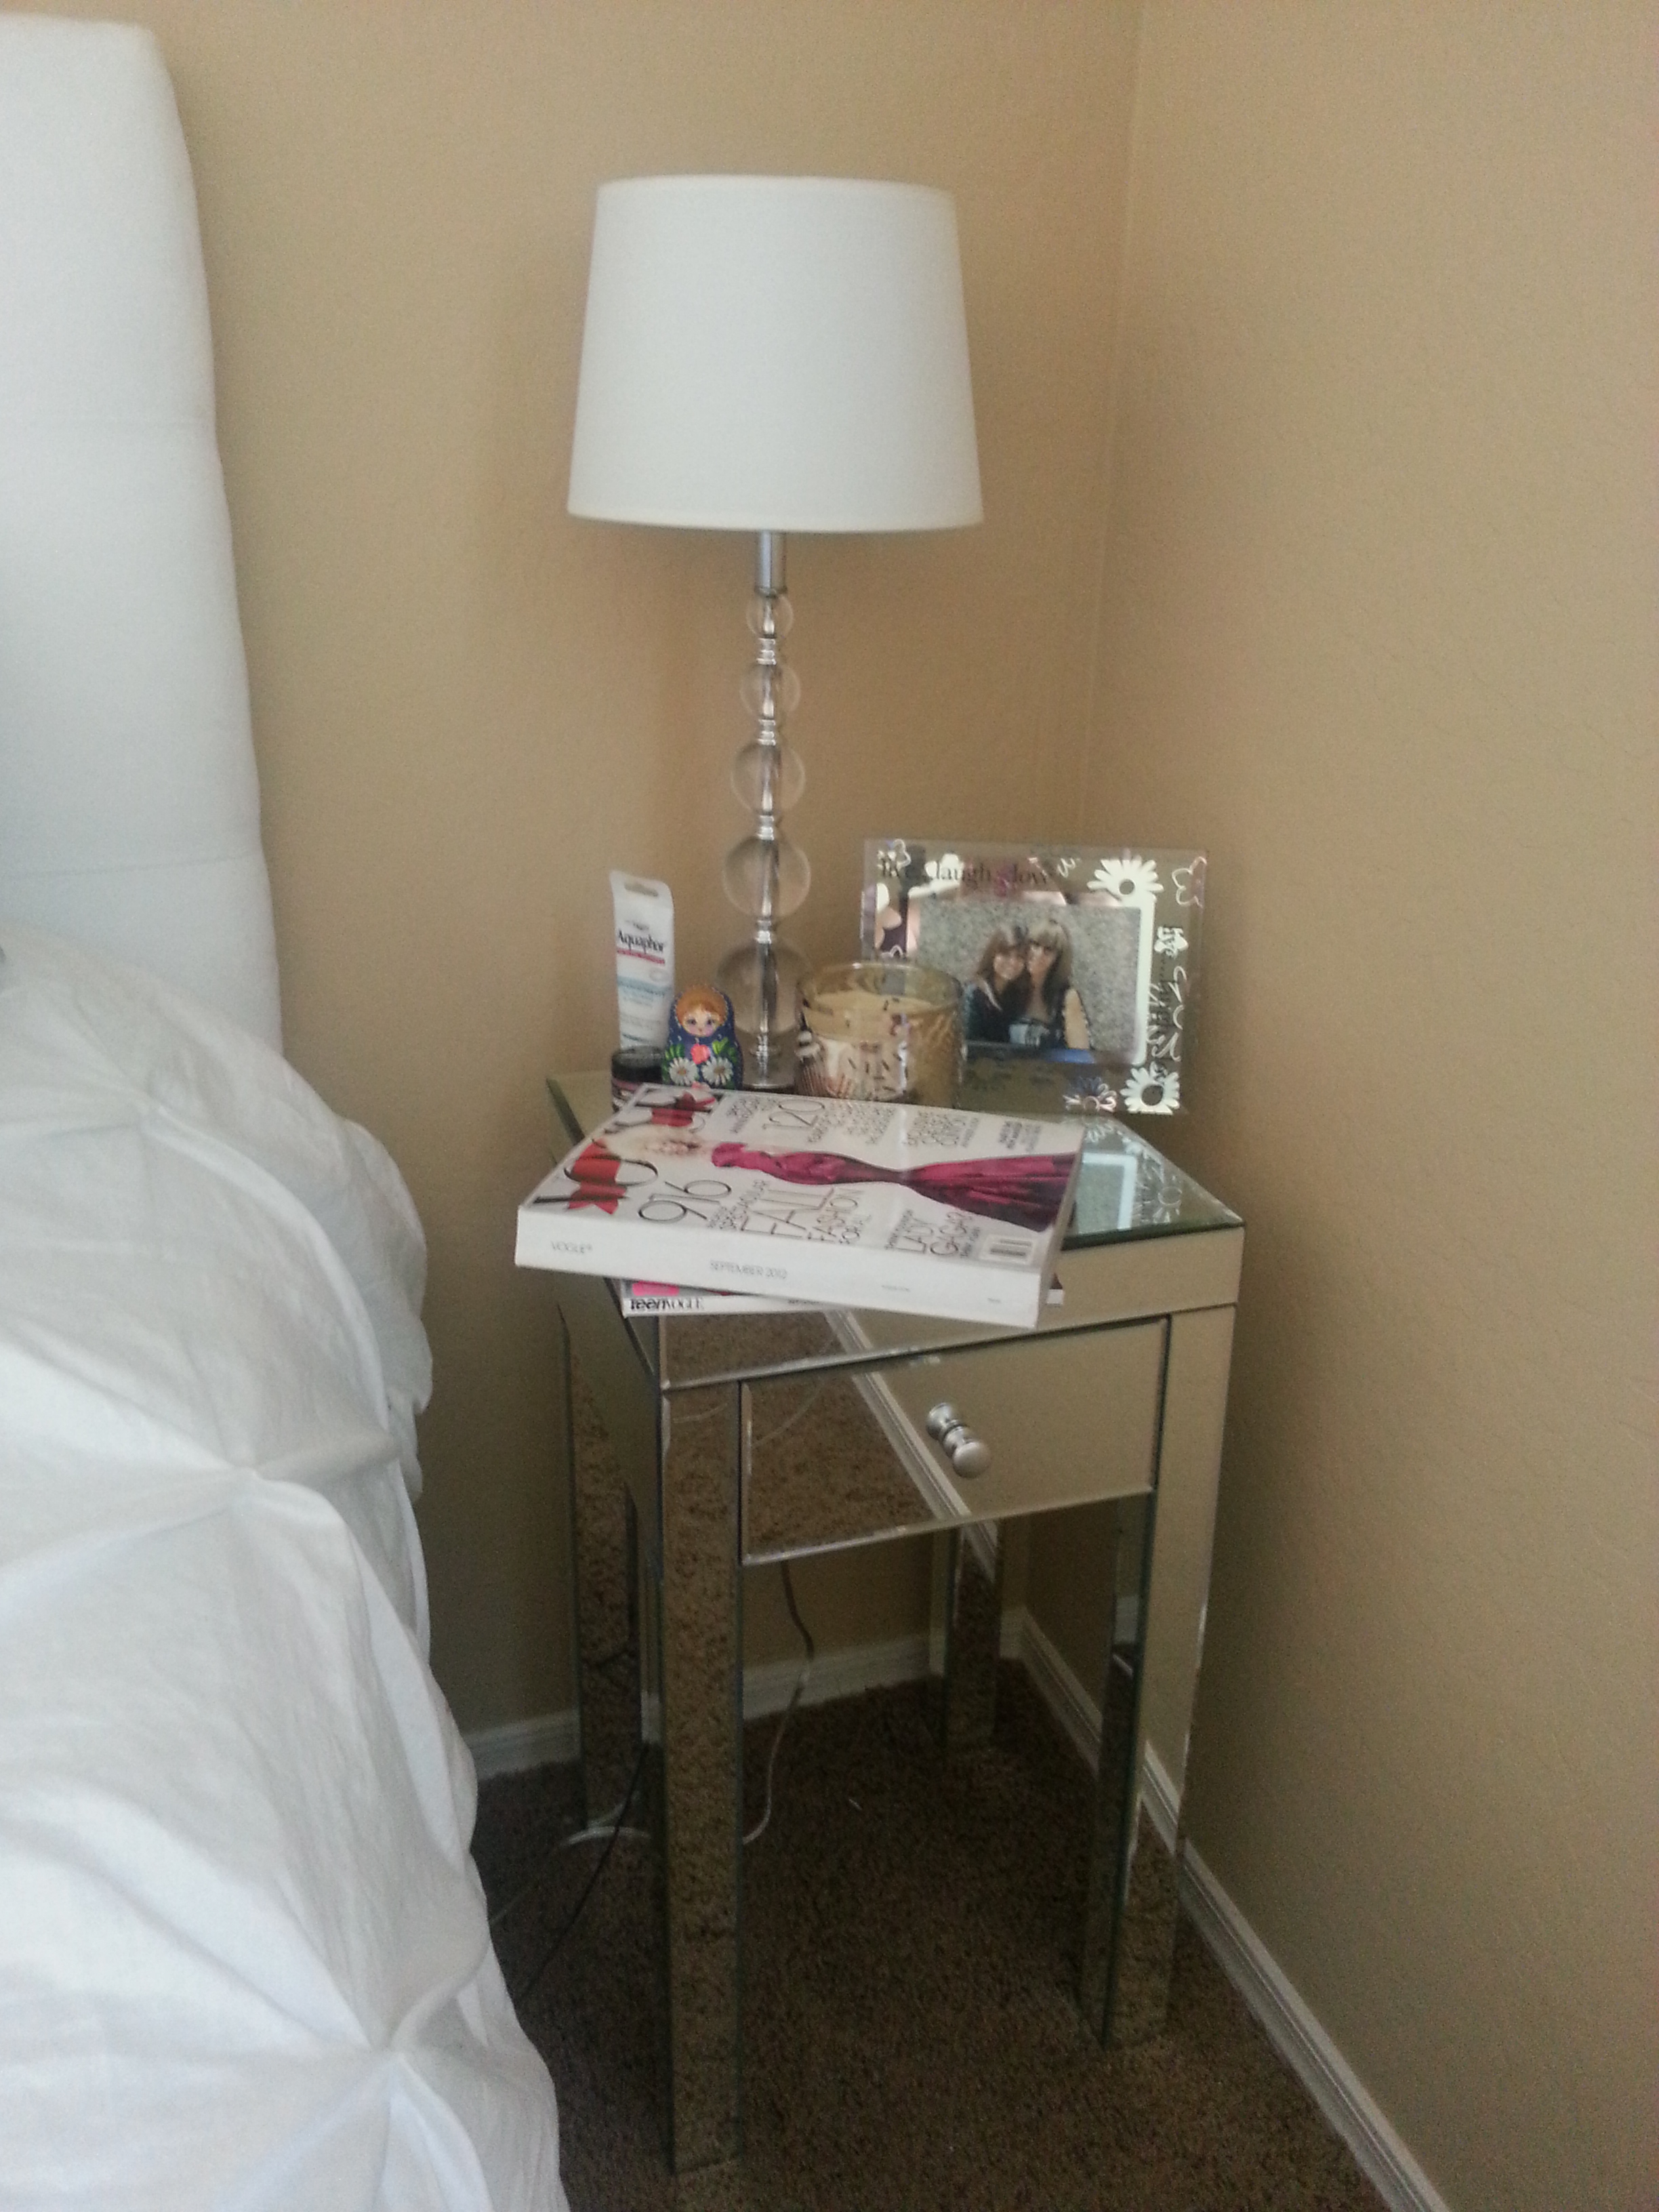 the outrageous cool mirrored nightstand from target ideas hotxpress gallant drawers together with bedroom storage plus amerock beautiful decorating furniture thin amelie hall